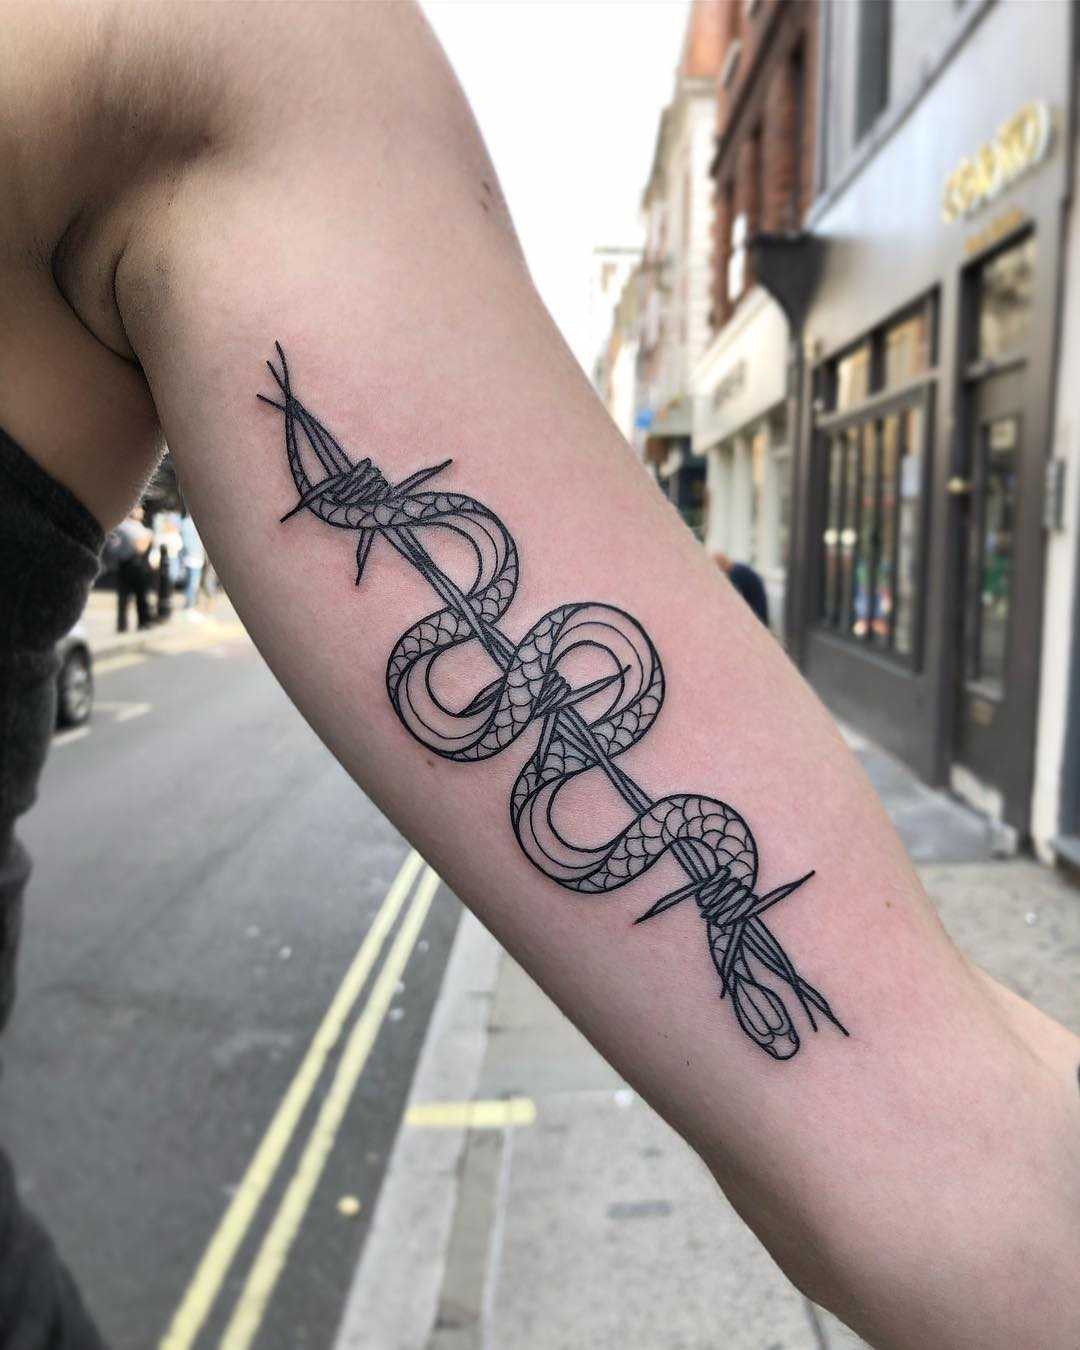 Snake on a barbed wire by Loz Thomas